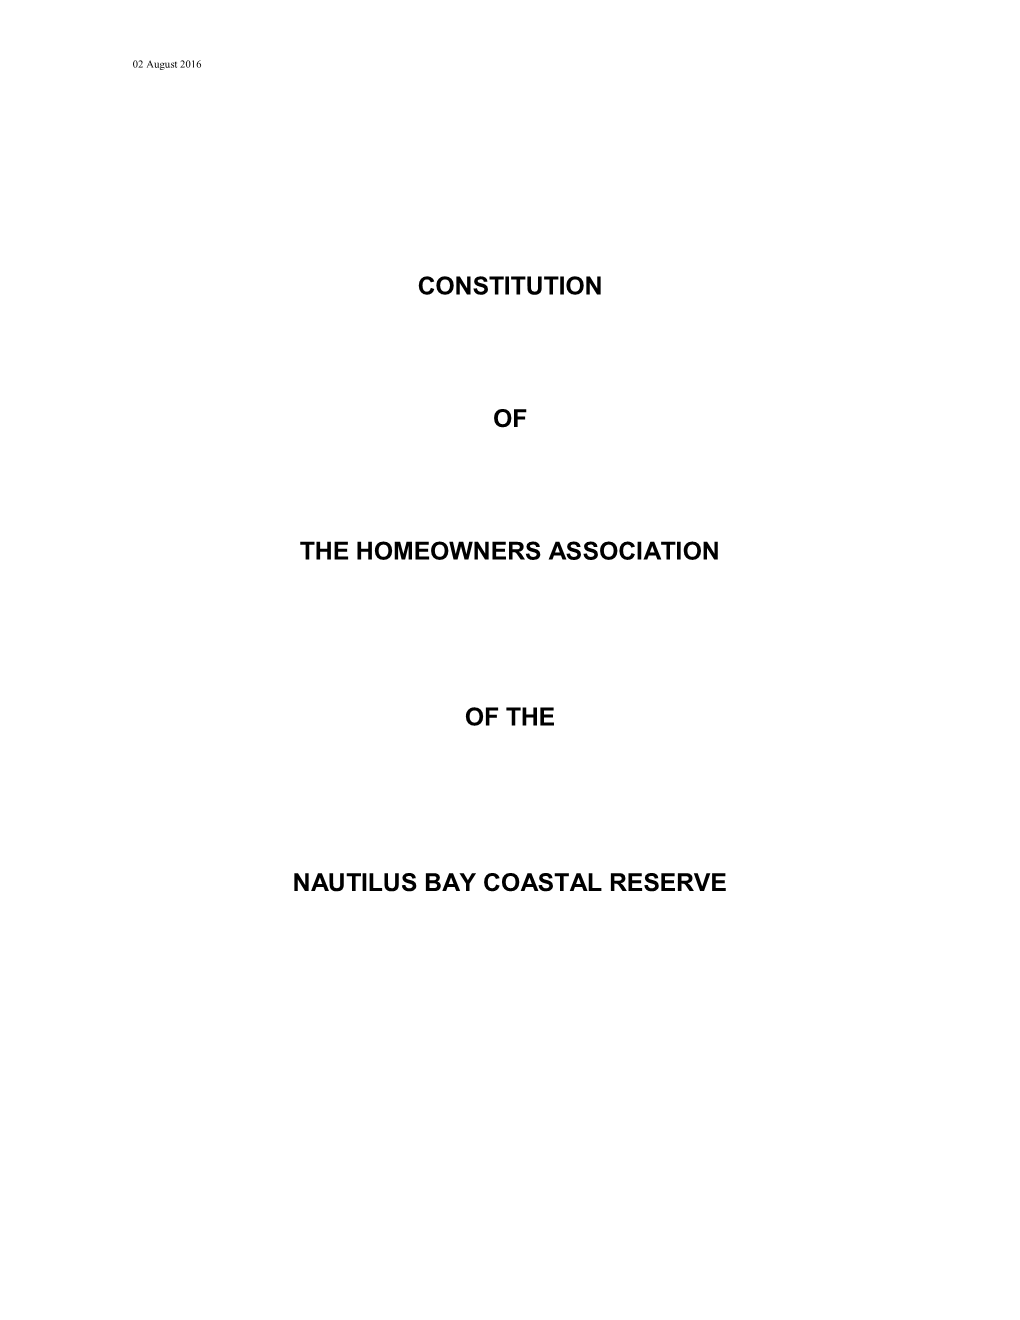 Constitution of the Homeowners Association of the Nautilus Bay